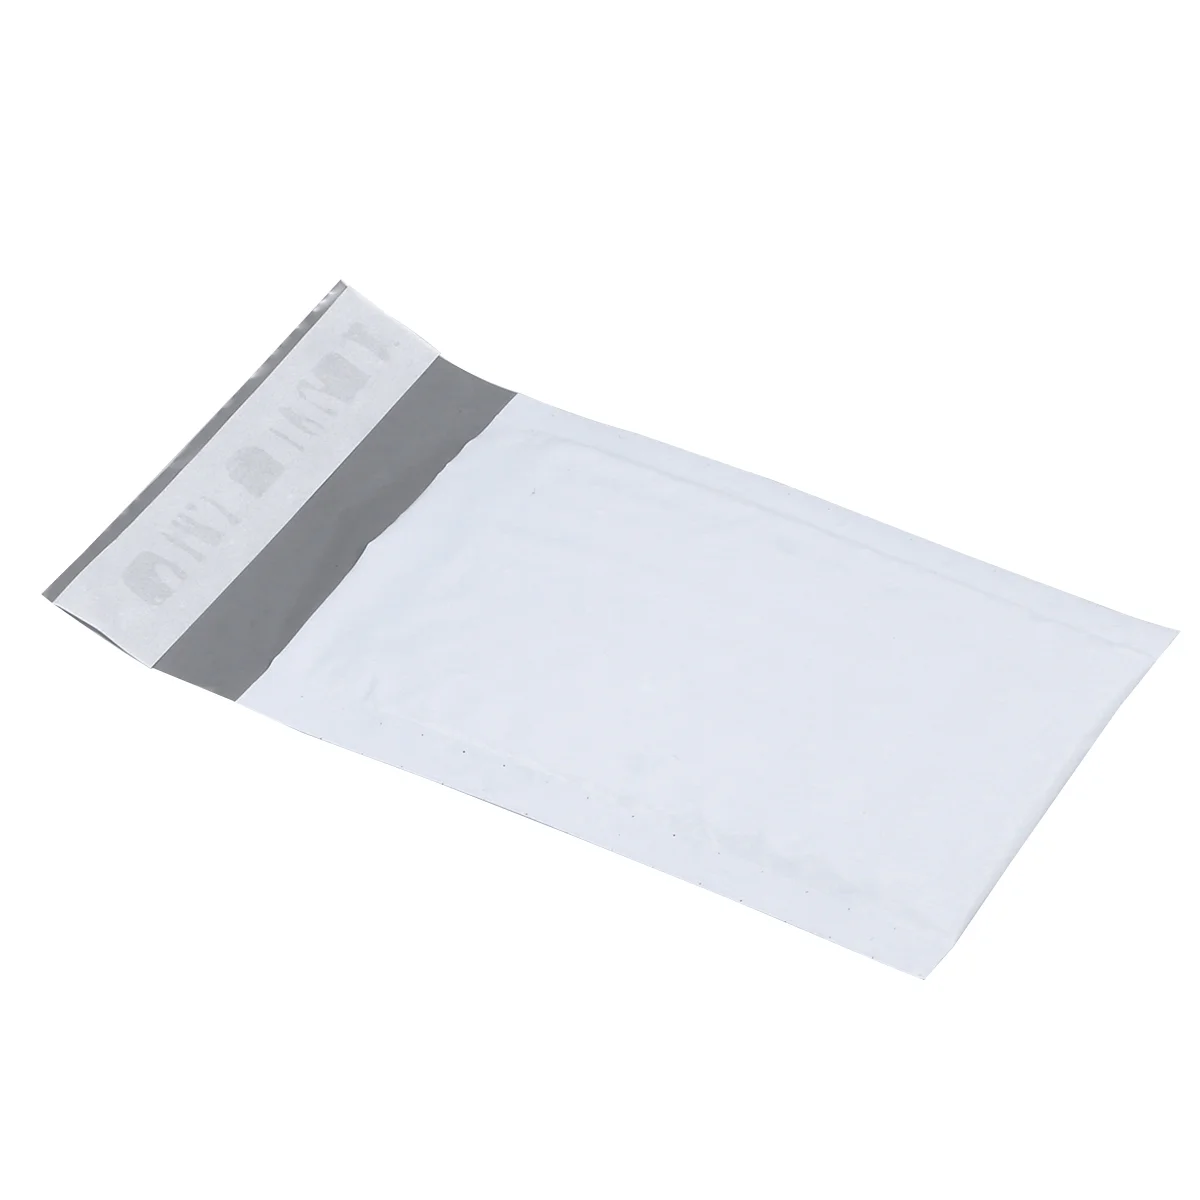 

50 Pcs Packaging Mailing Bags Anti-Shock Anti-Pressure Bubble Envelope Colorful Envelopes Packing Glassine Plastic with closure